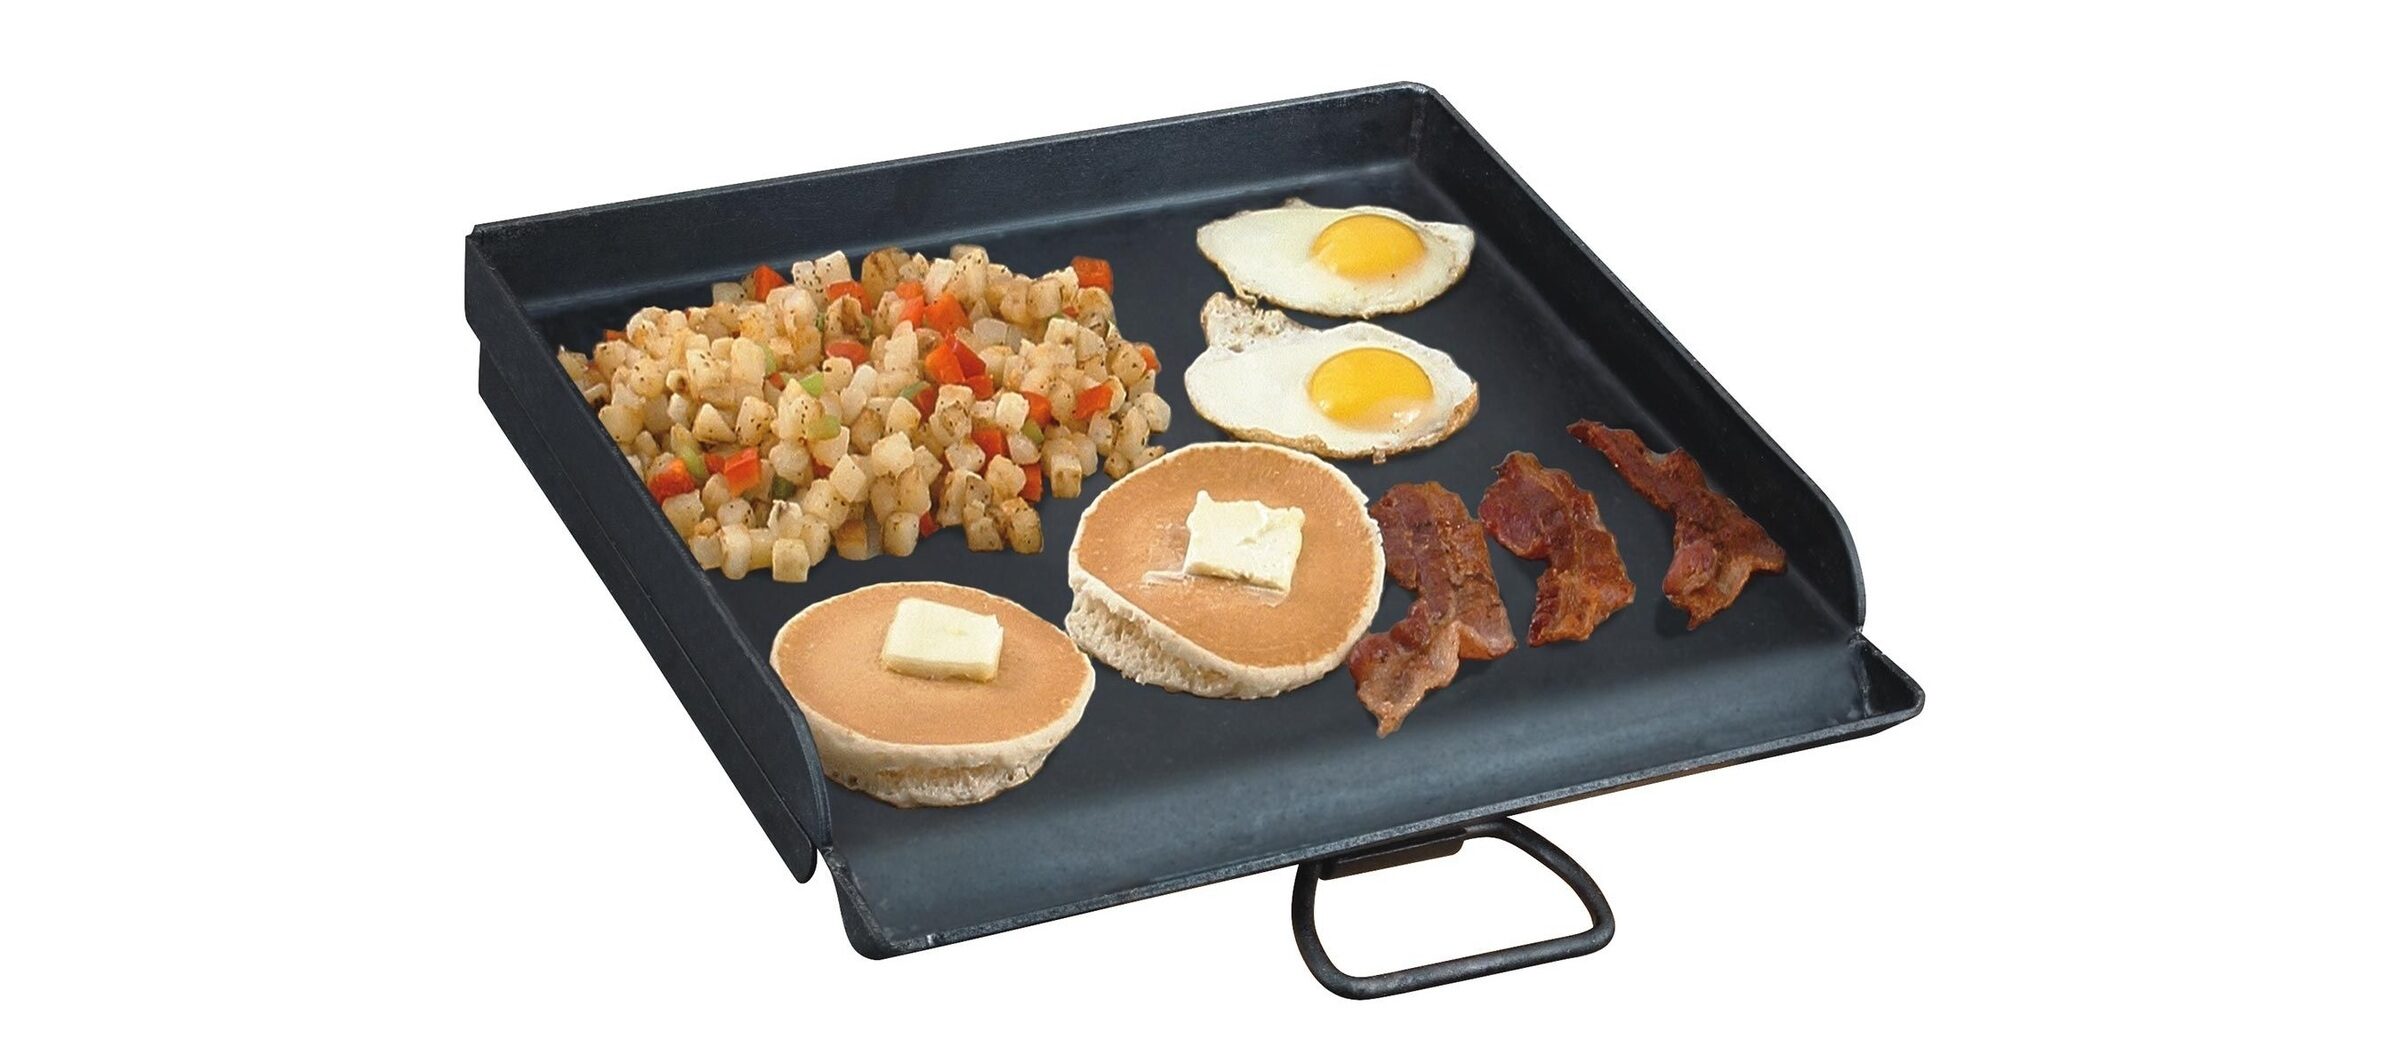 Camp Chef Universal Griddle